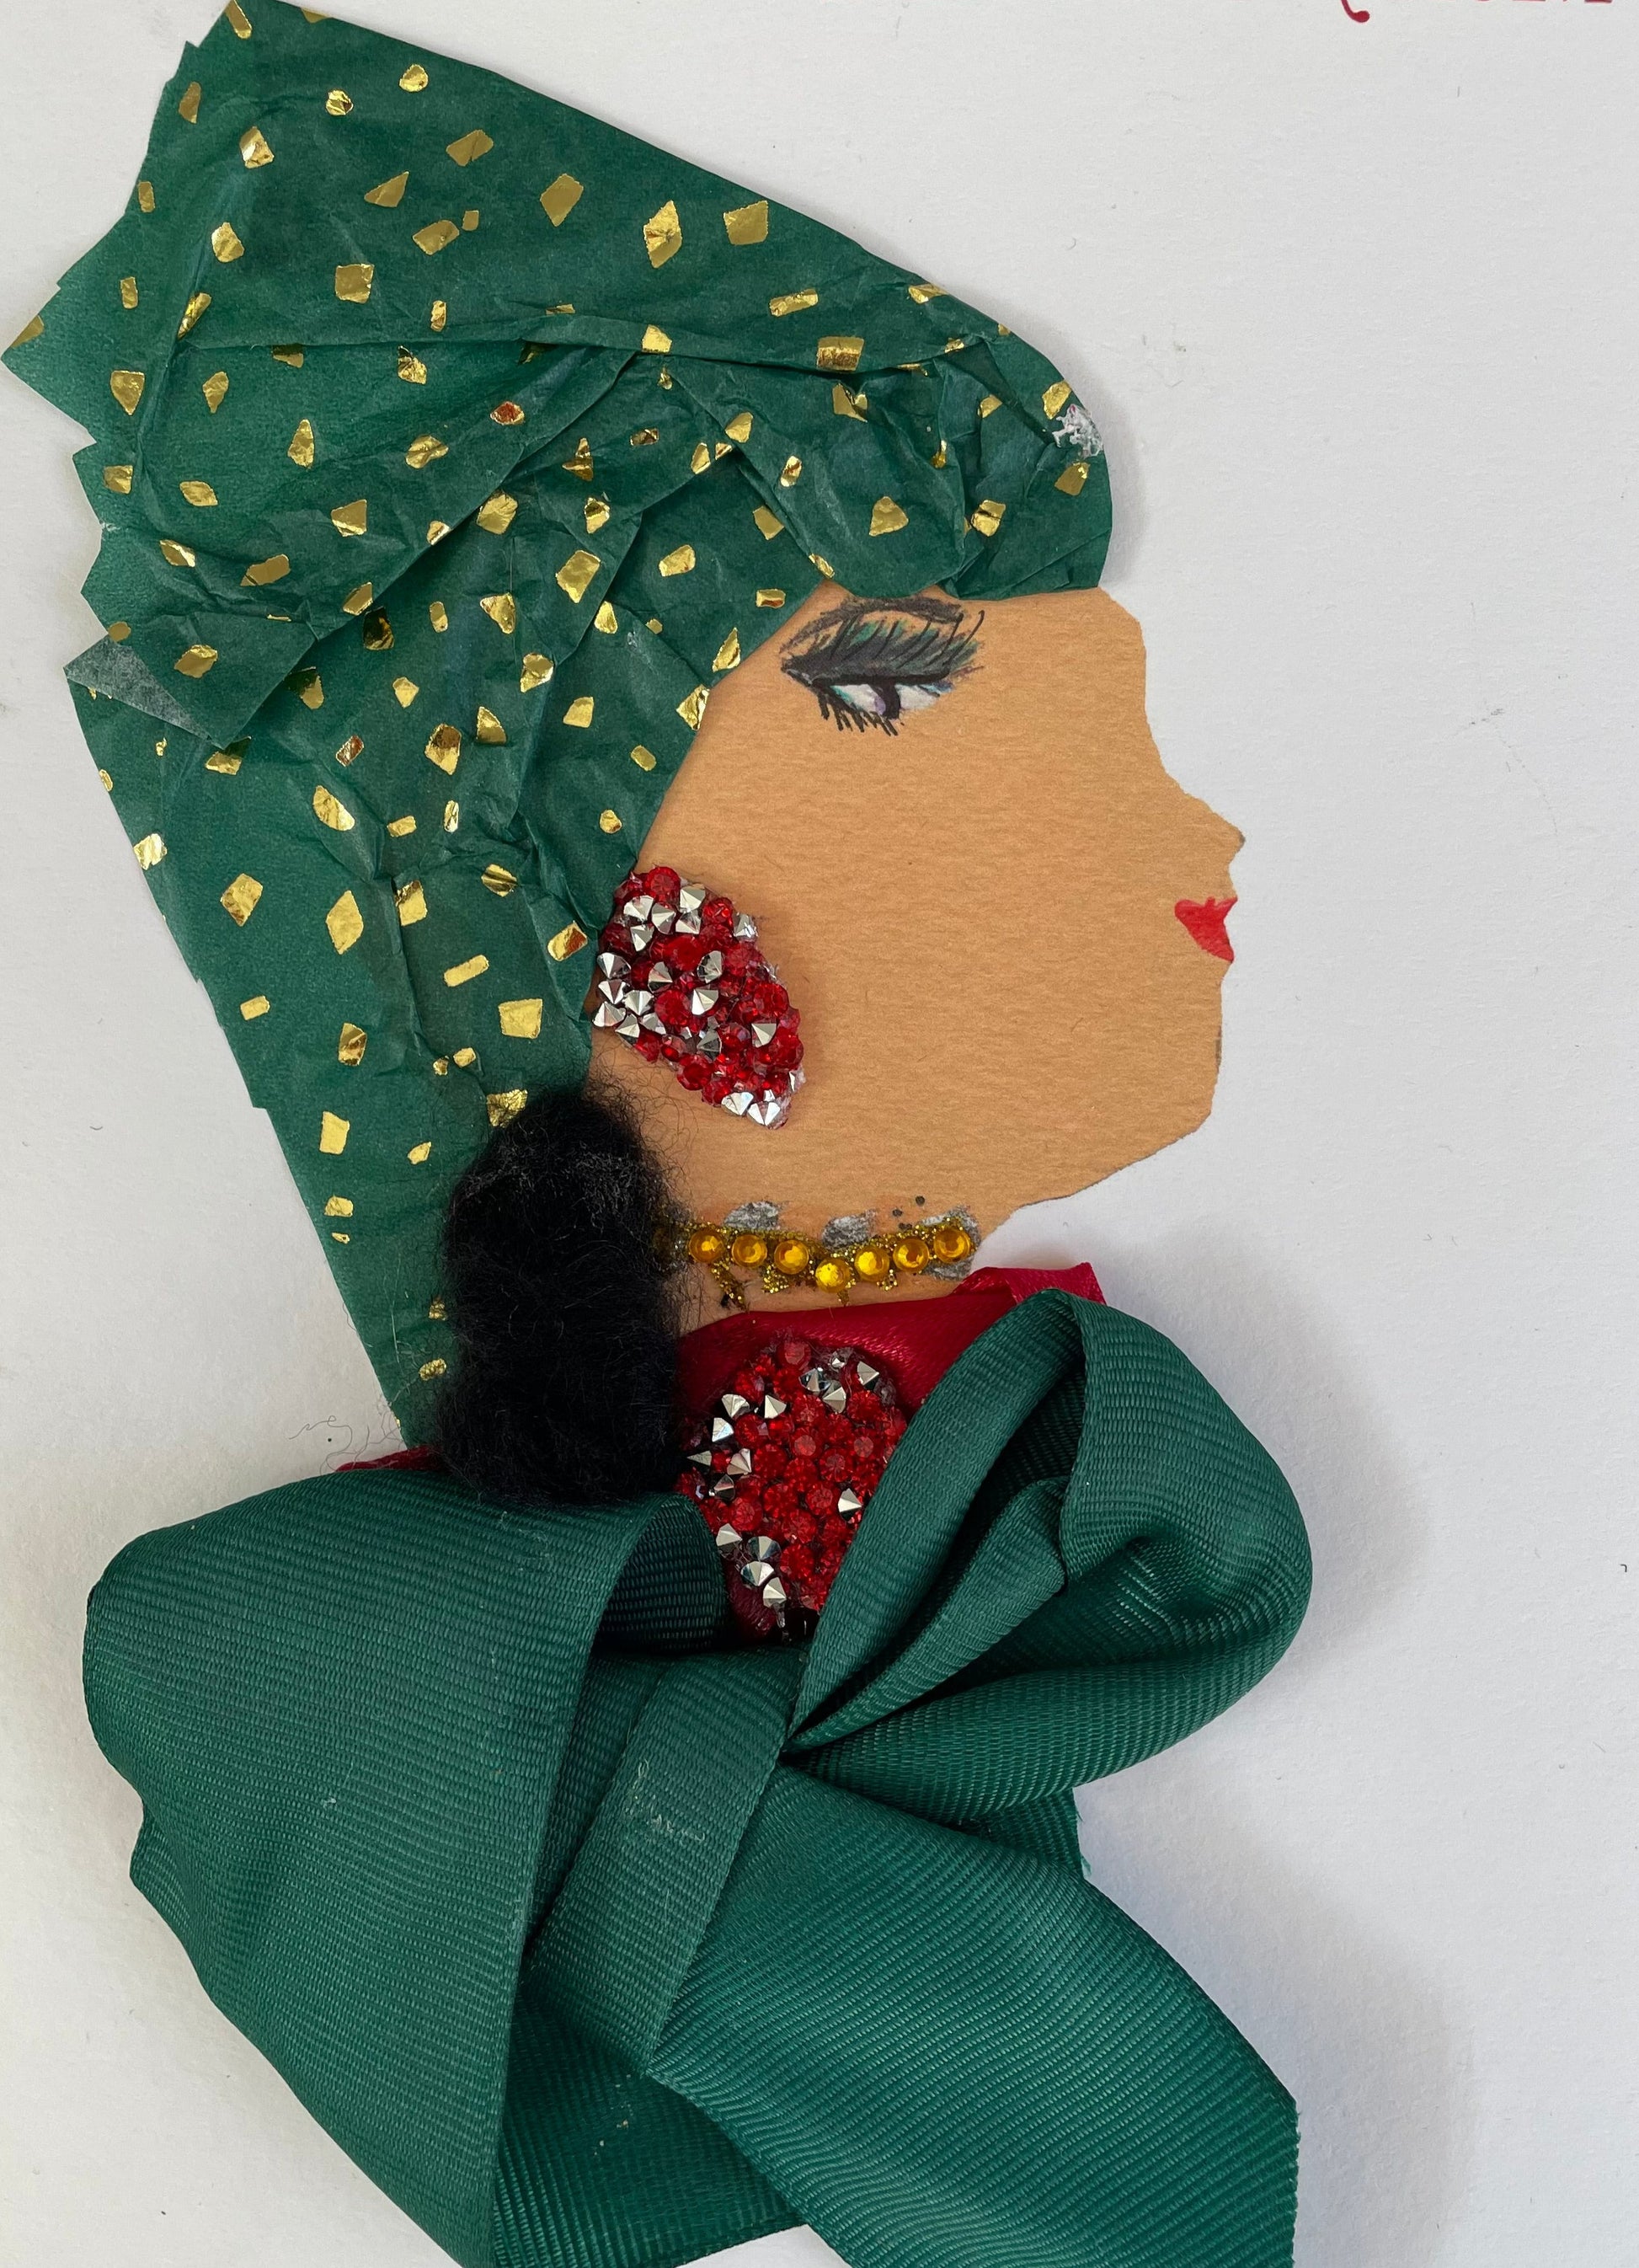 I designed this card of a woman named Ginny Green. She has a white skin tone and is wearing a dark green blouse that resembles a bow. She has a matching set of red and silver diamanté earrings and necklace. She also layered a gold and blue jewel-like necklace. Ginny is wearing a green and gold confetti headpiece. It says "Merry Christmas" in the top left corner.